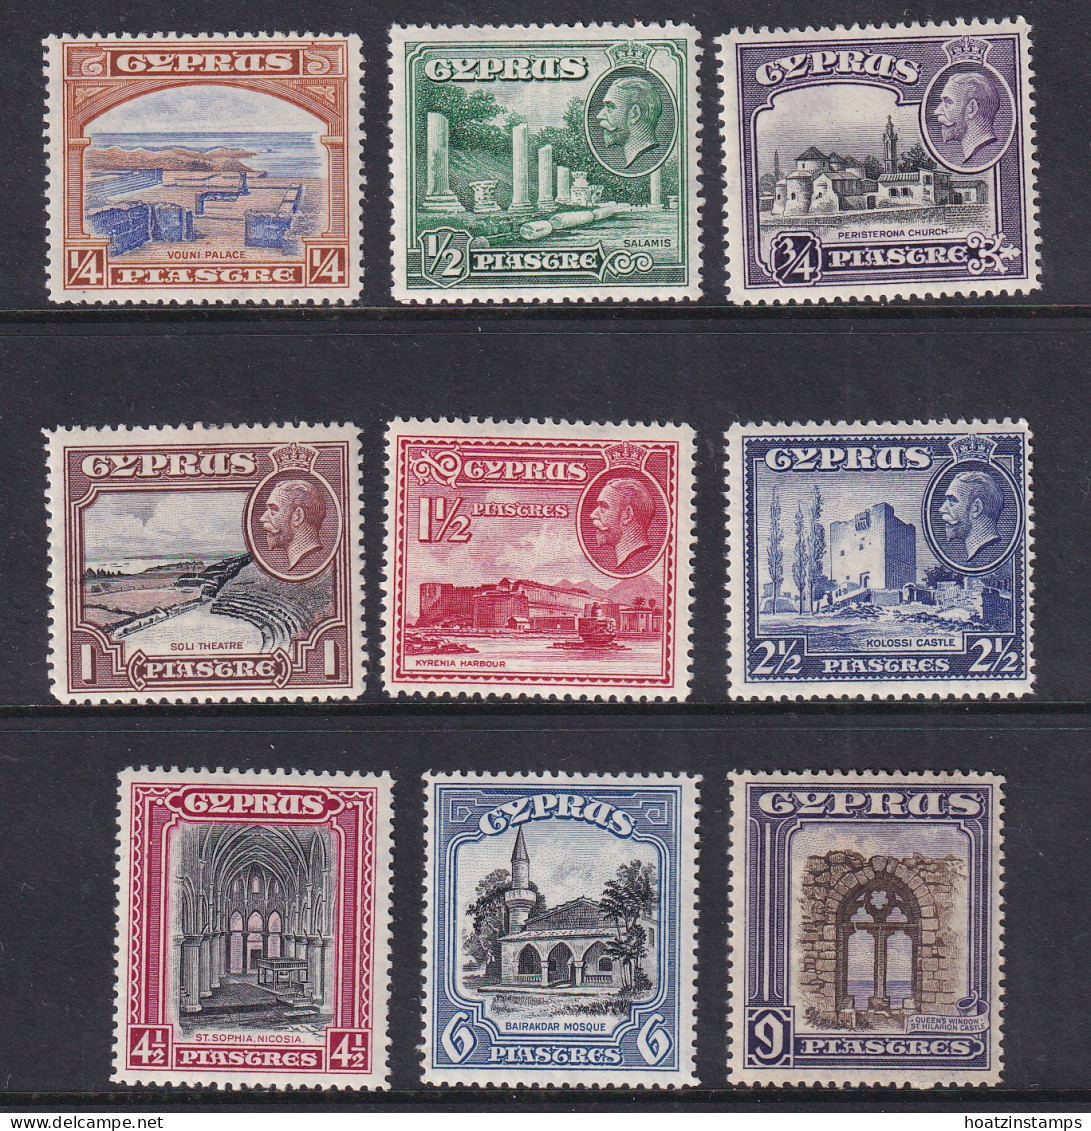 Cyprus: 1934   KGV - Pictorial To 9pi   SG133-141    MH  - Cyprus (...-1960)